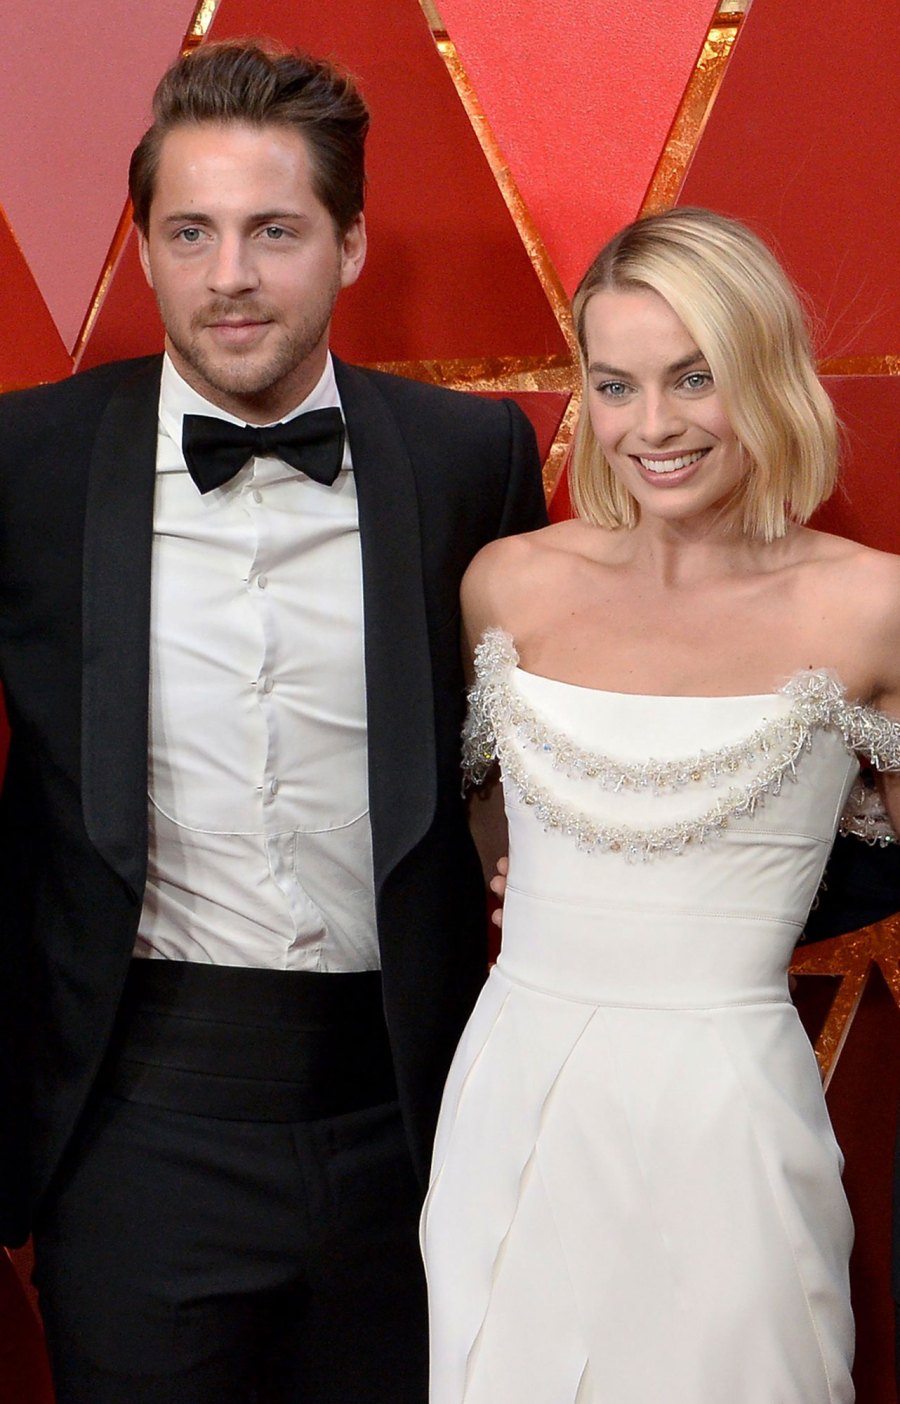 Margot Robbie and Husband Tom Ackerley's Relationship Timeline: Inside Their Low-Key Marriage 2018